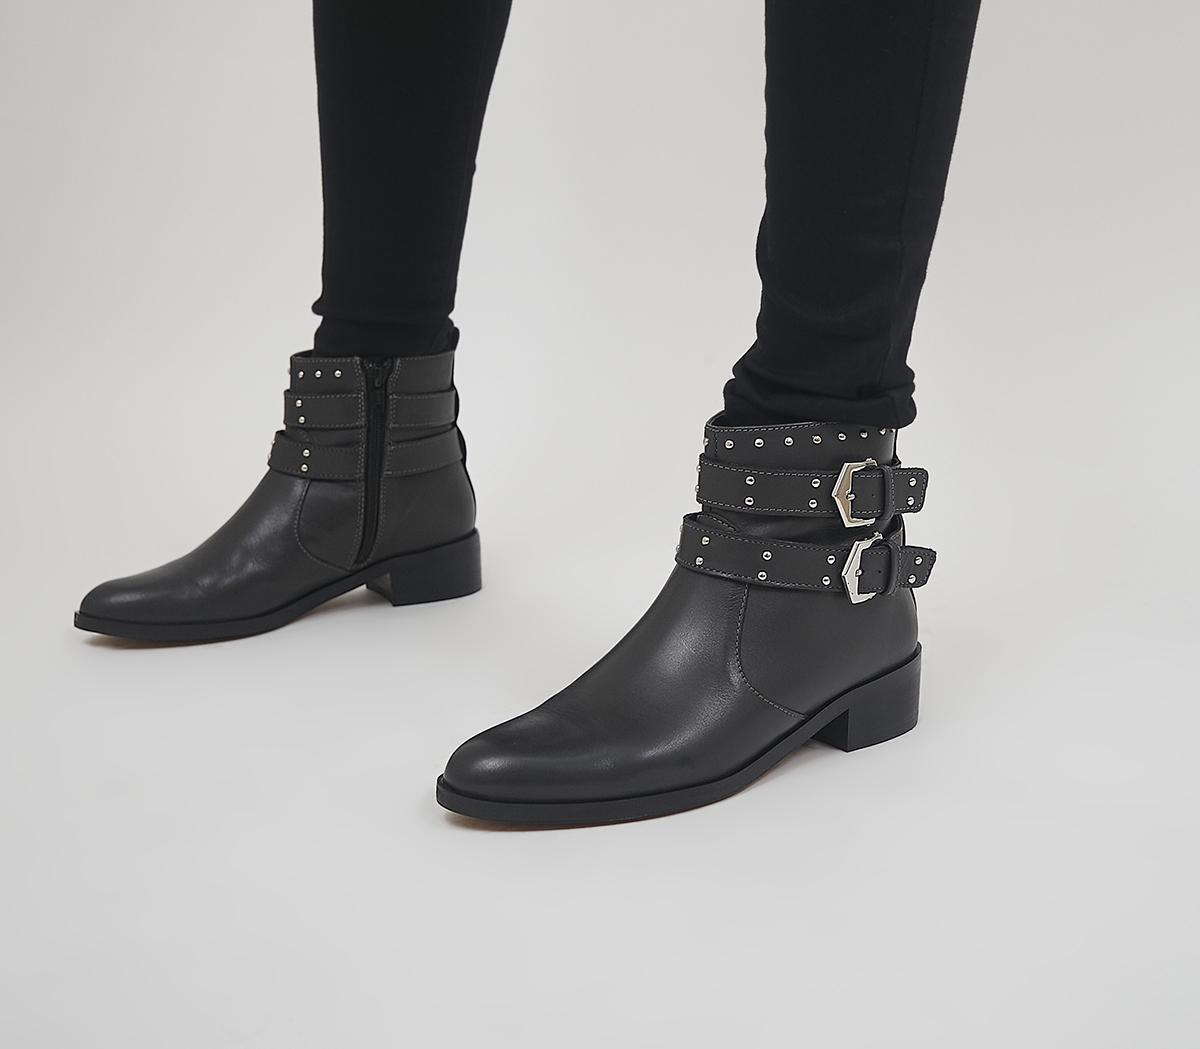 OfficeAnchor Double Buckle Studded Ankle BootsDark Grey Leather